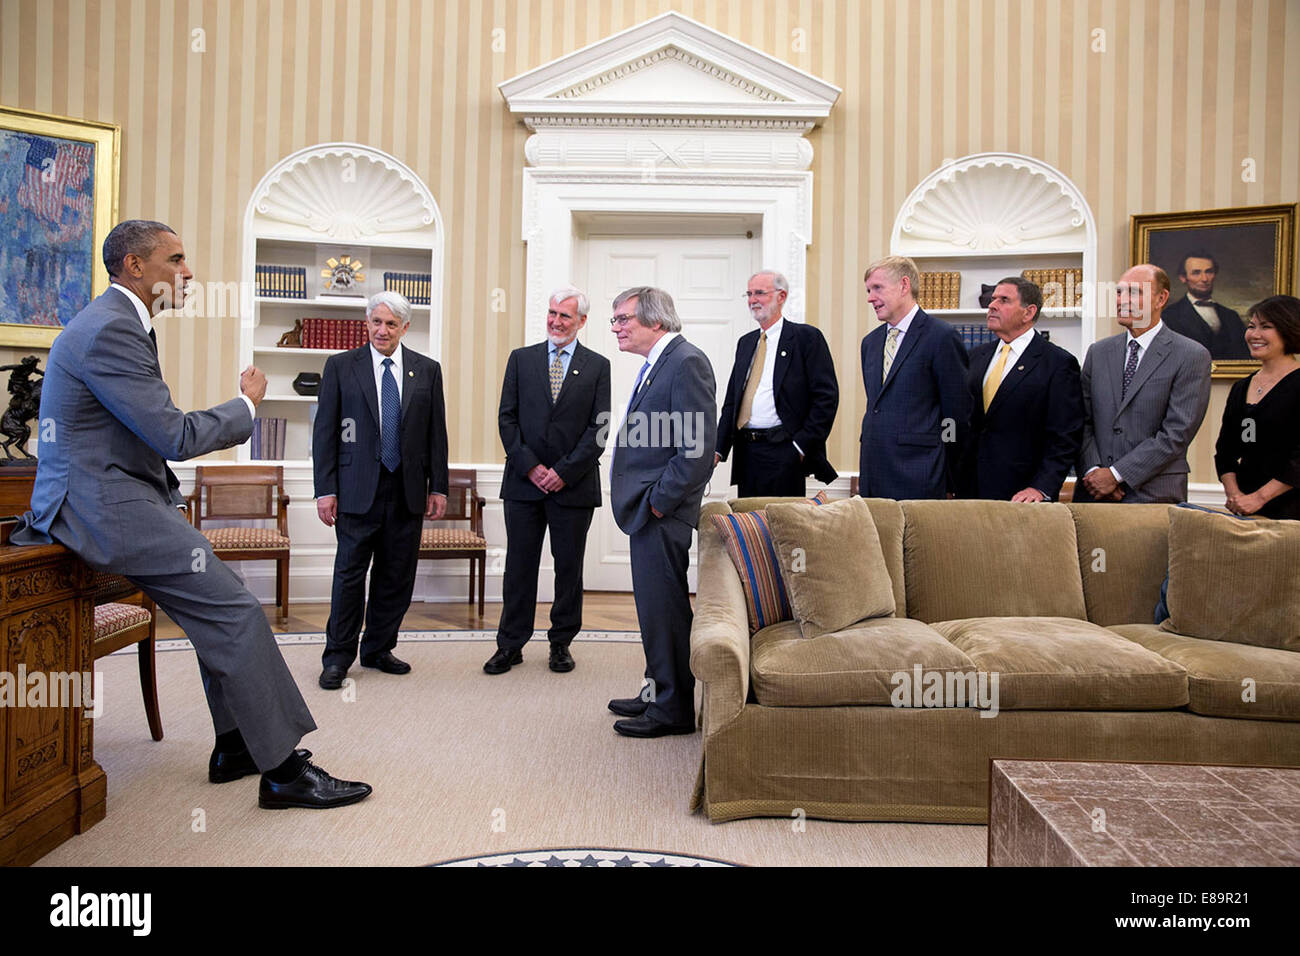 President Barack Obama greets four of the nine 2014 Kavli Prize laureates with representatives from the Kavli Foundation and other guests in the Oval Office, July 31, 2014. The 2014 Kavli Prize laureates were selected for making fundamental contributions Stock Photo